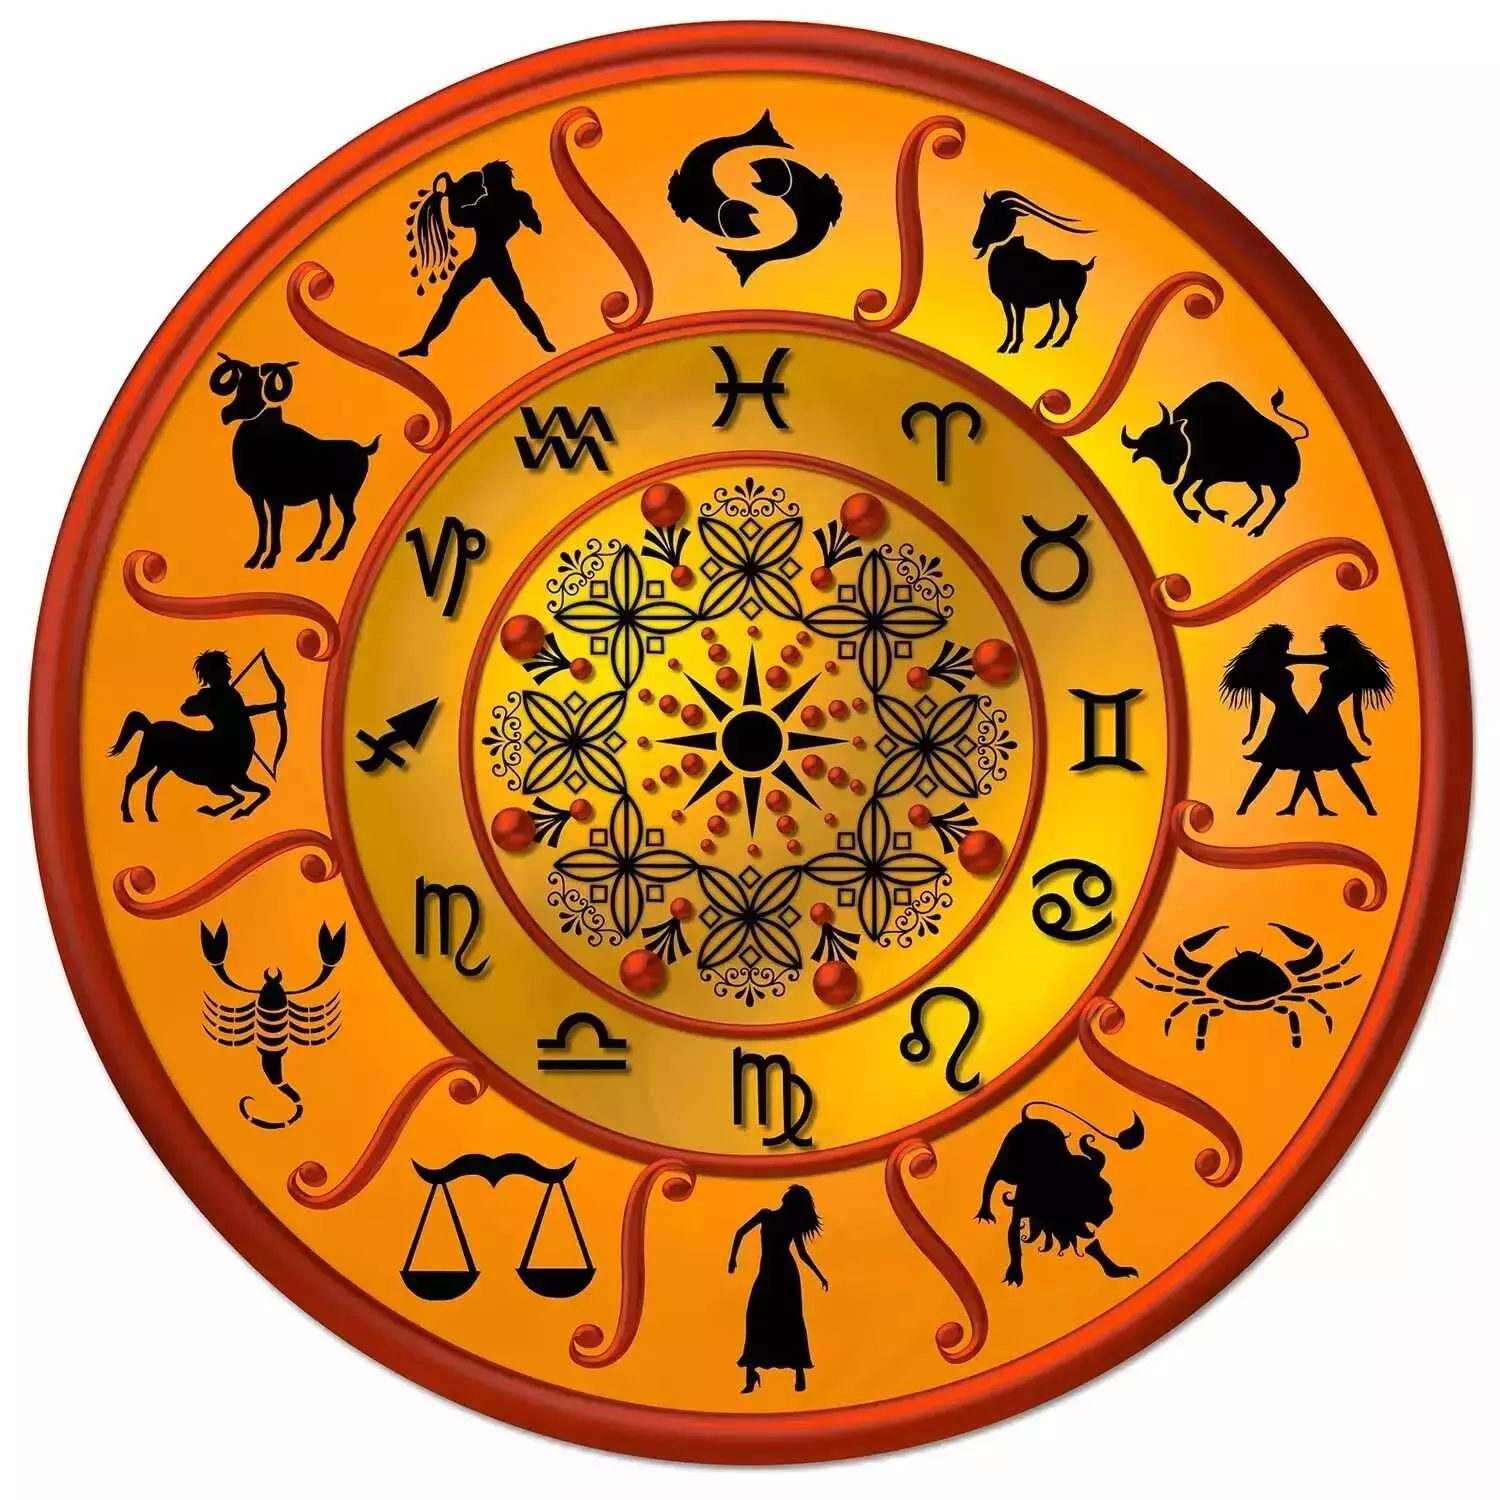 14 February – Know Your Todays Horoscope